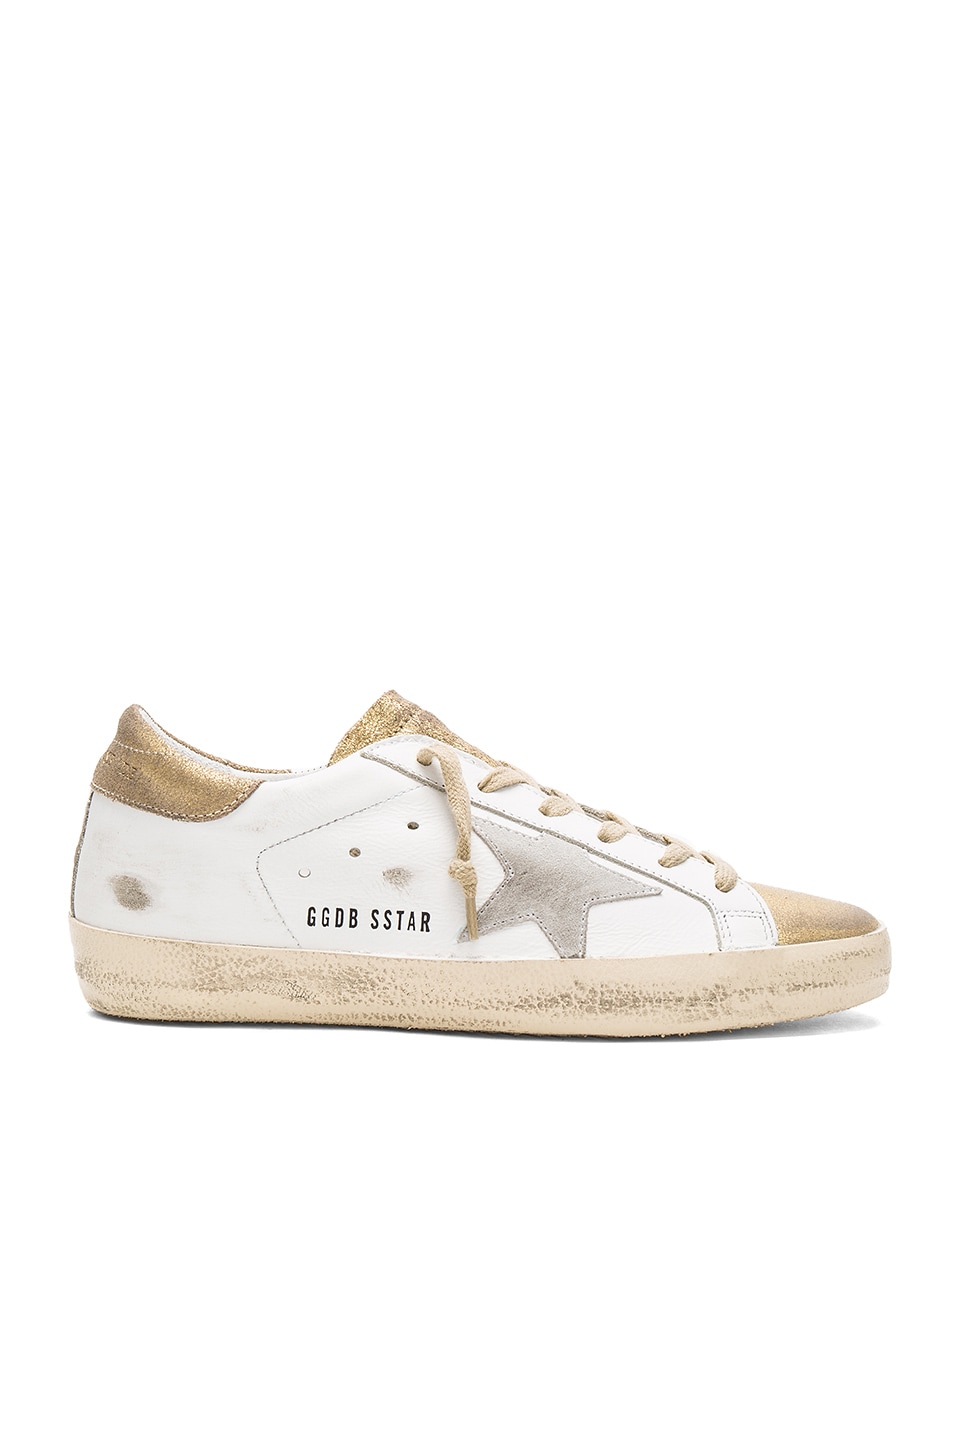 golden goose white and gold